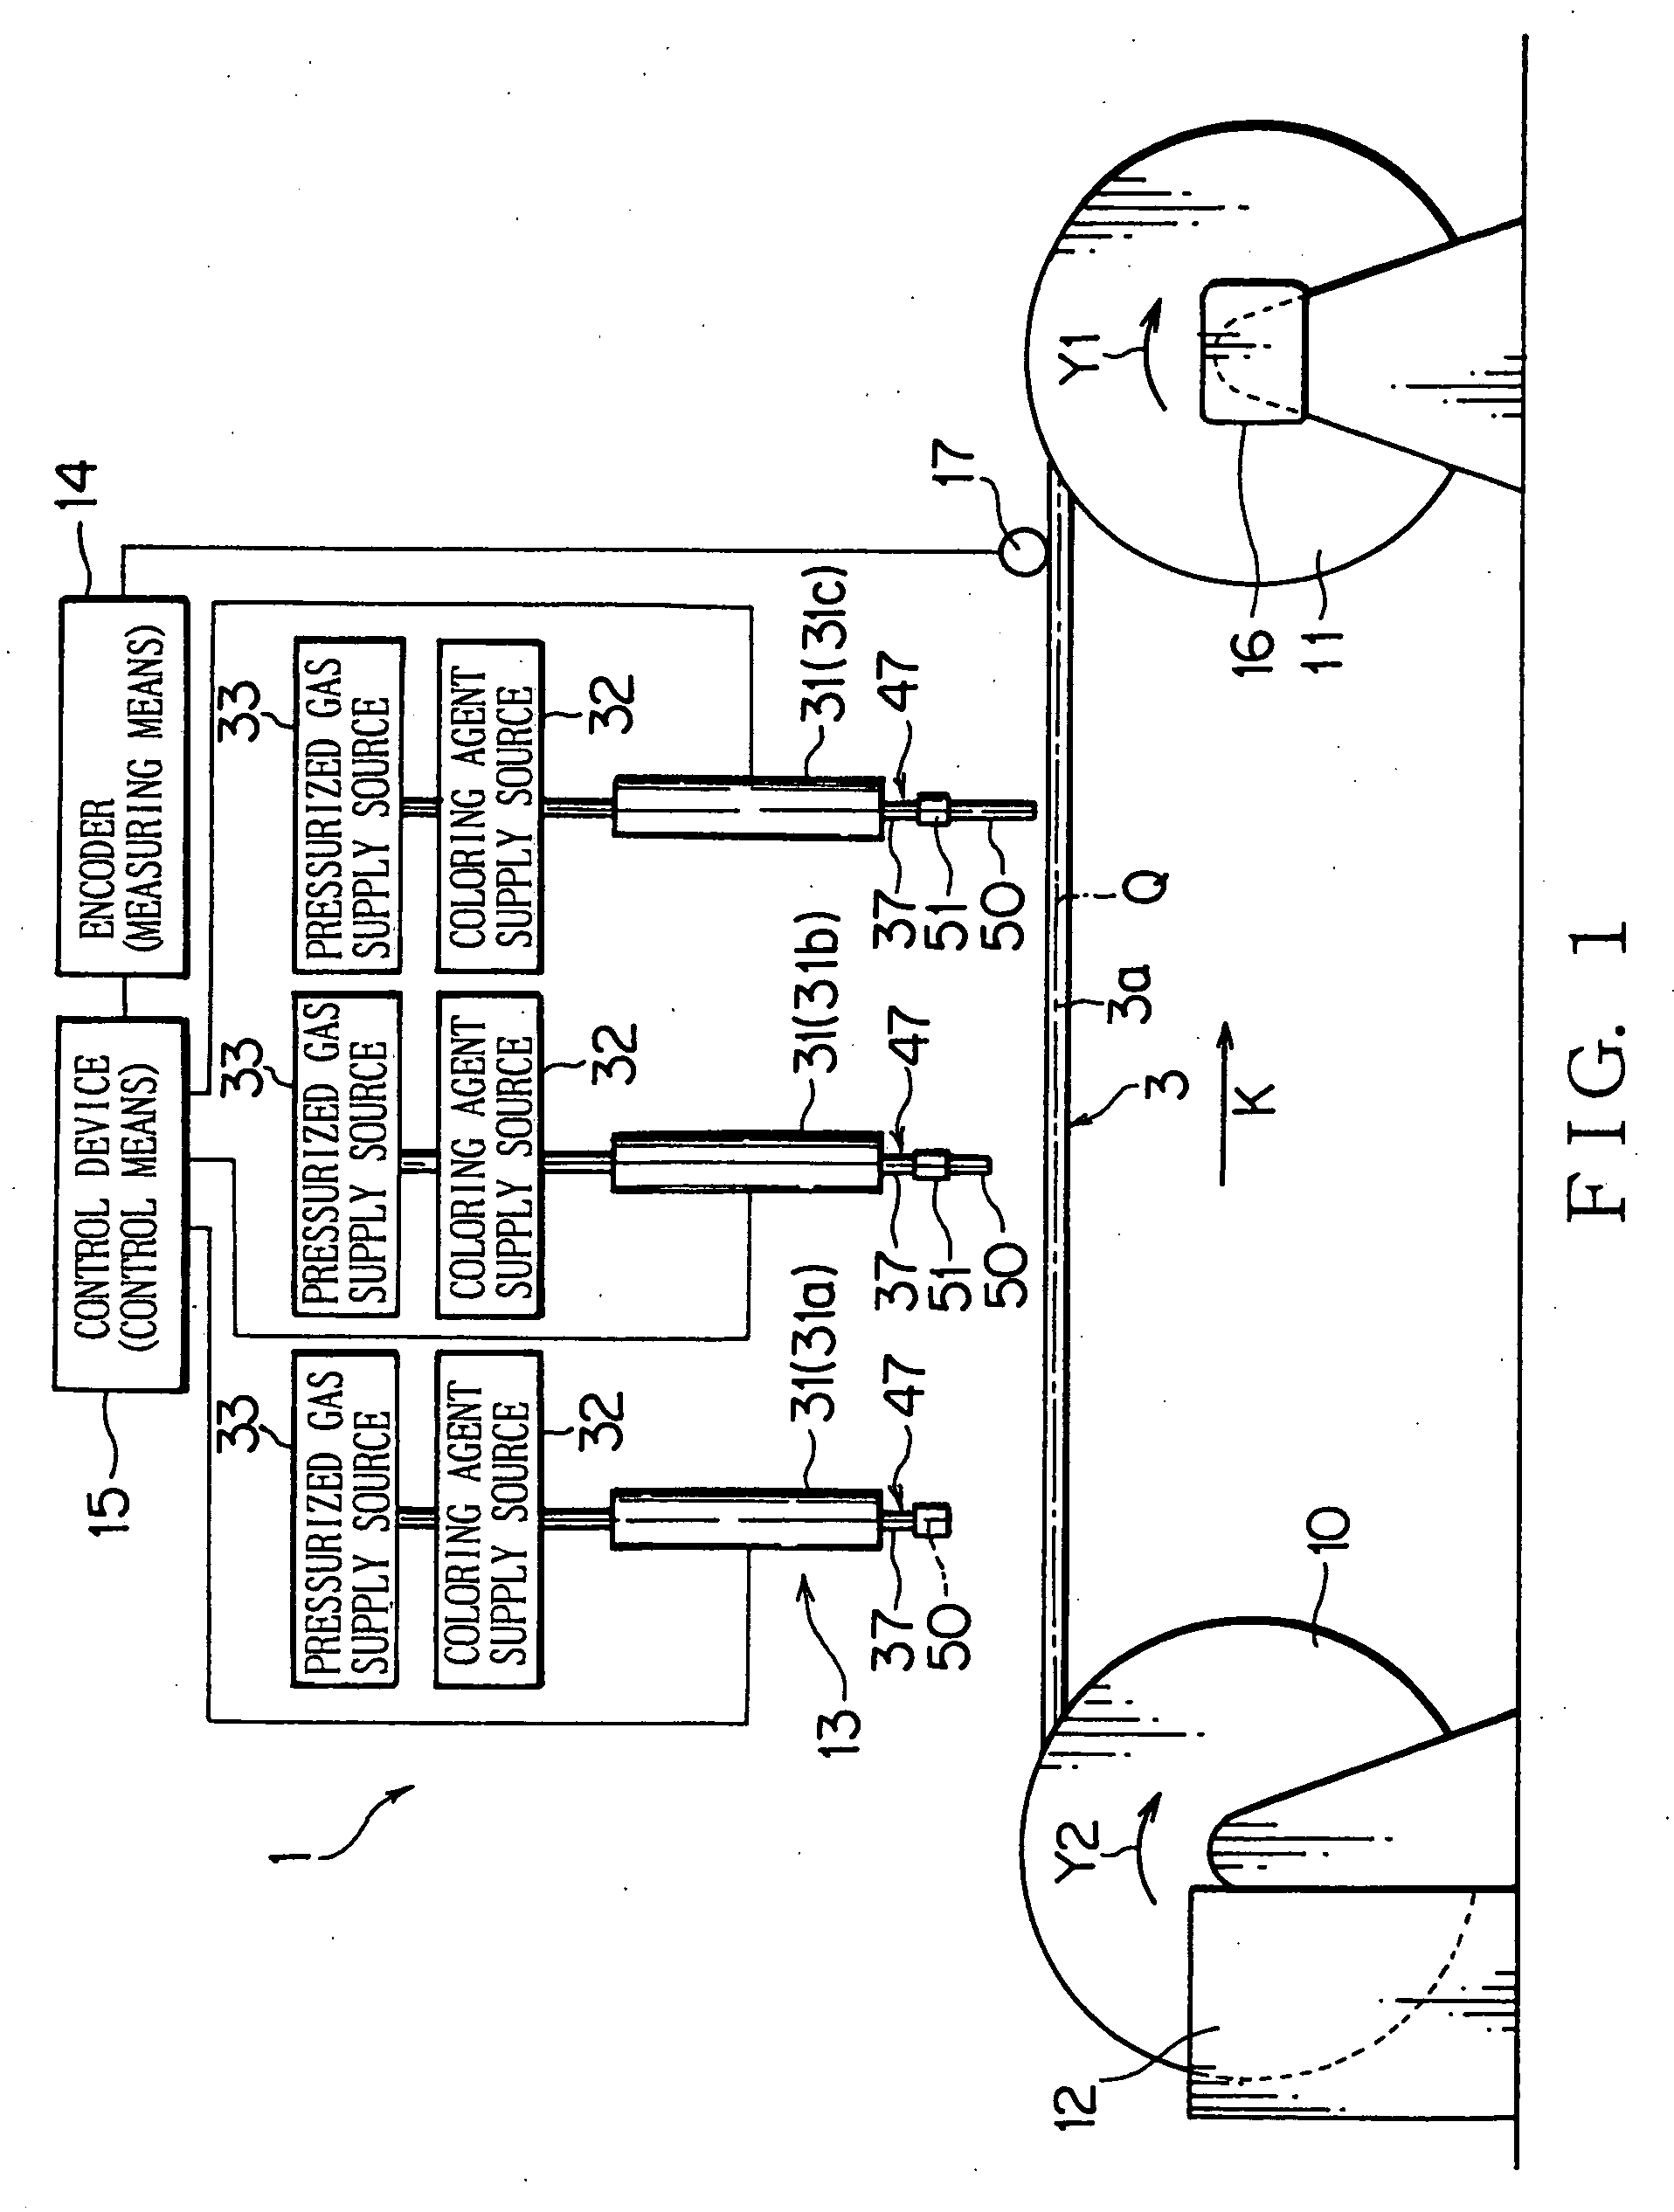 Apparatus and method for coloring electric wire